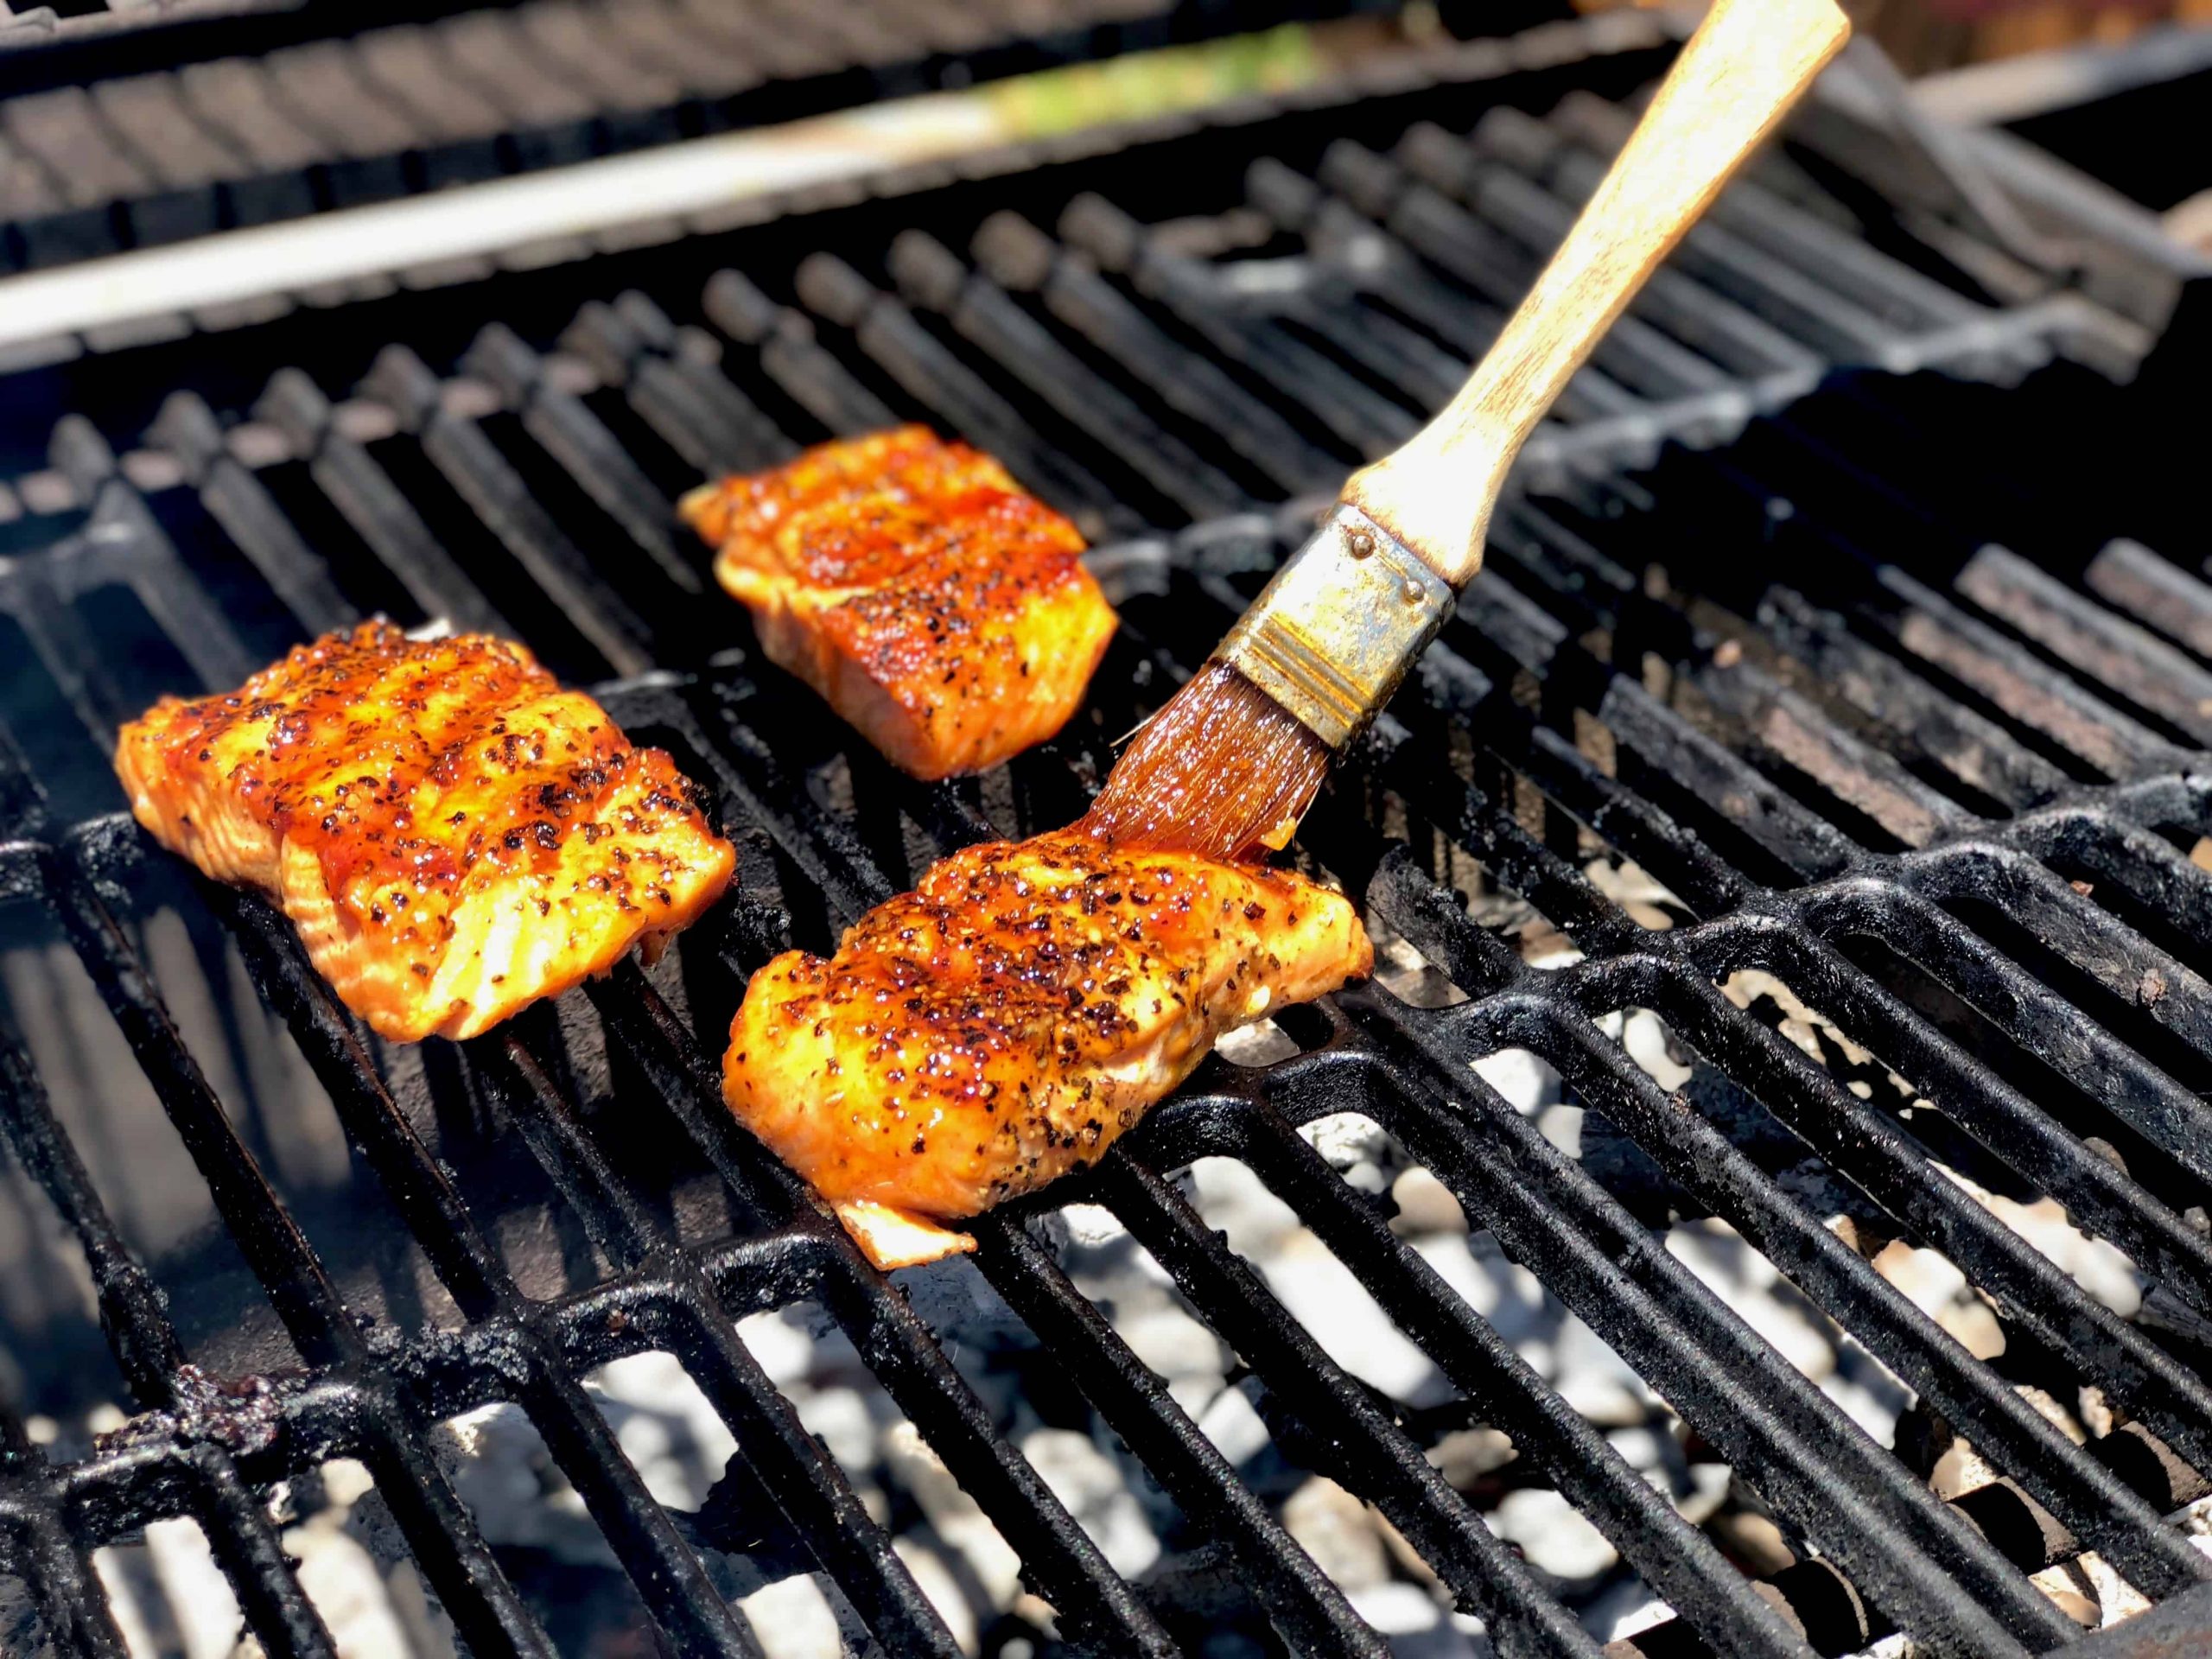 You should try grilling fish on barbecue